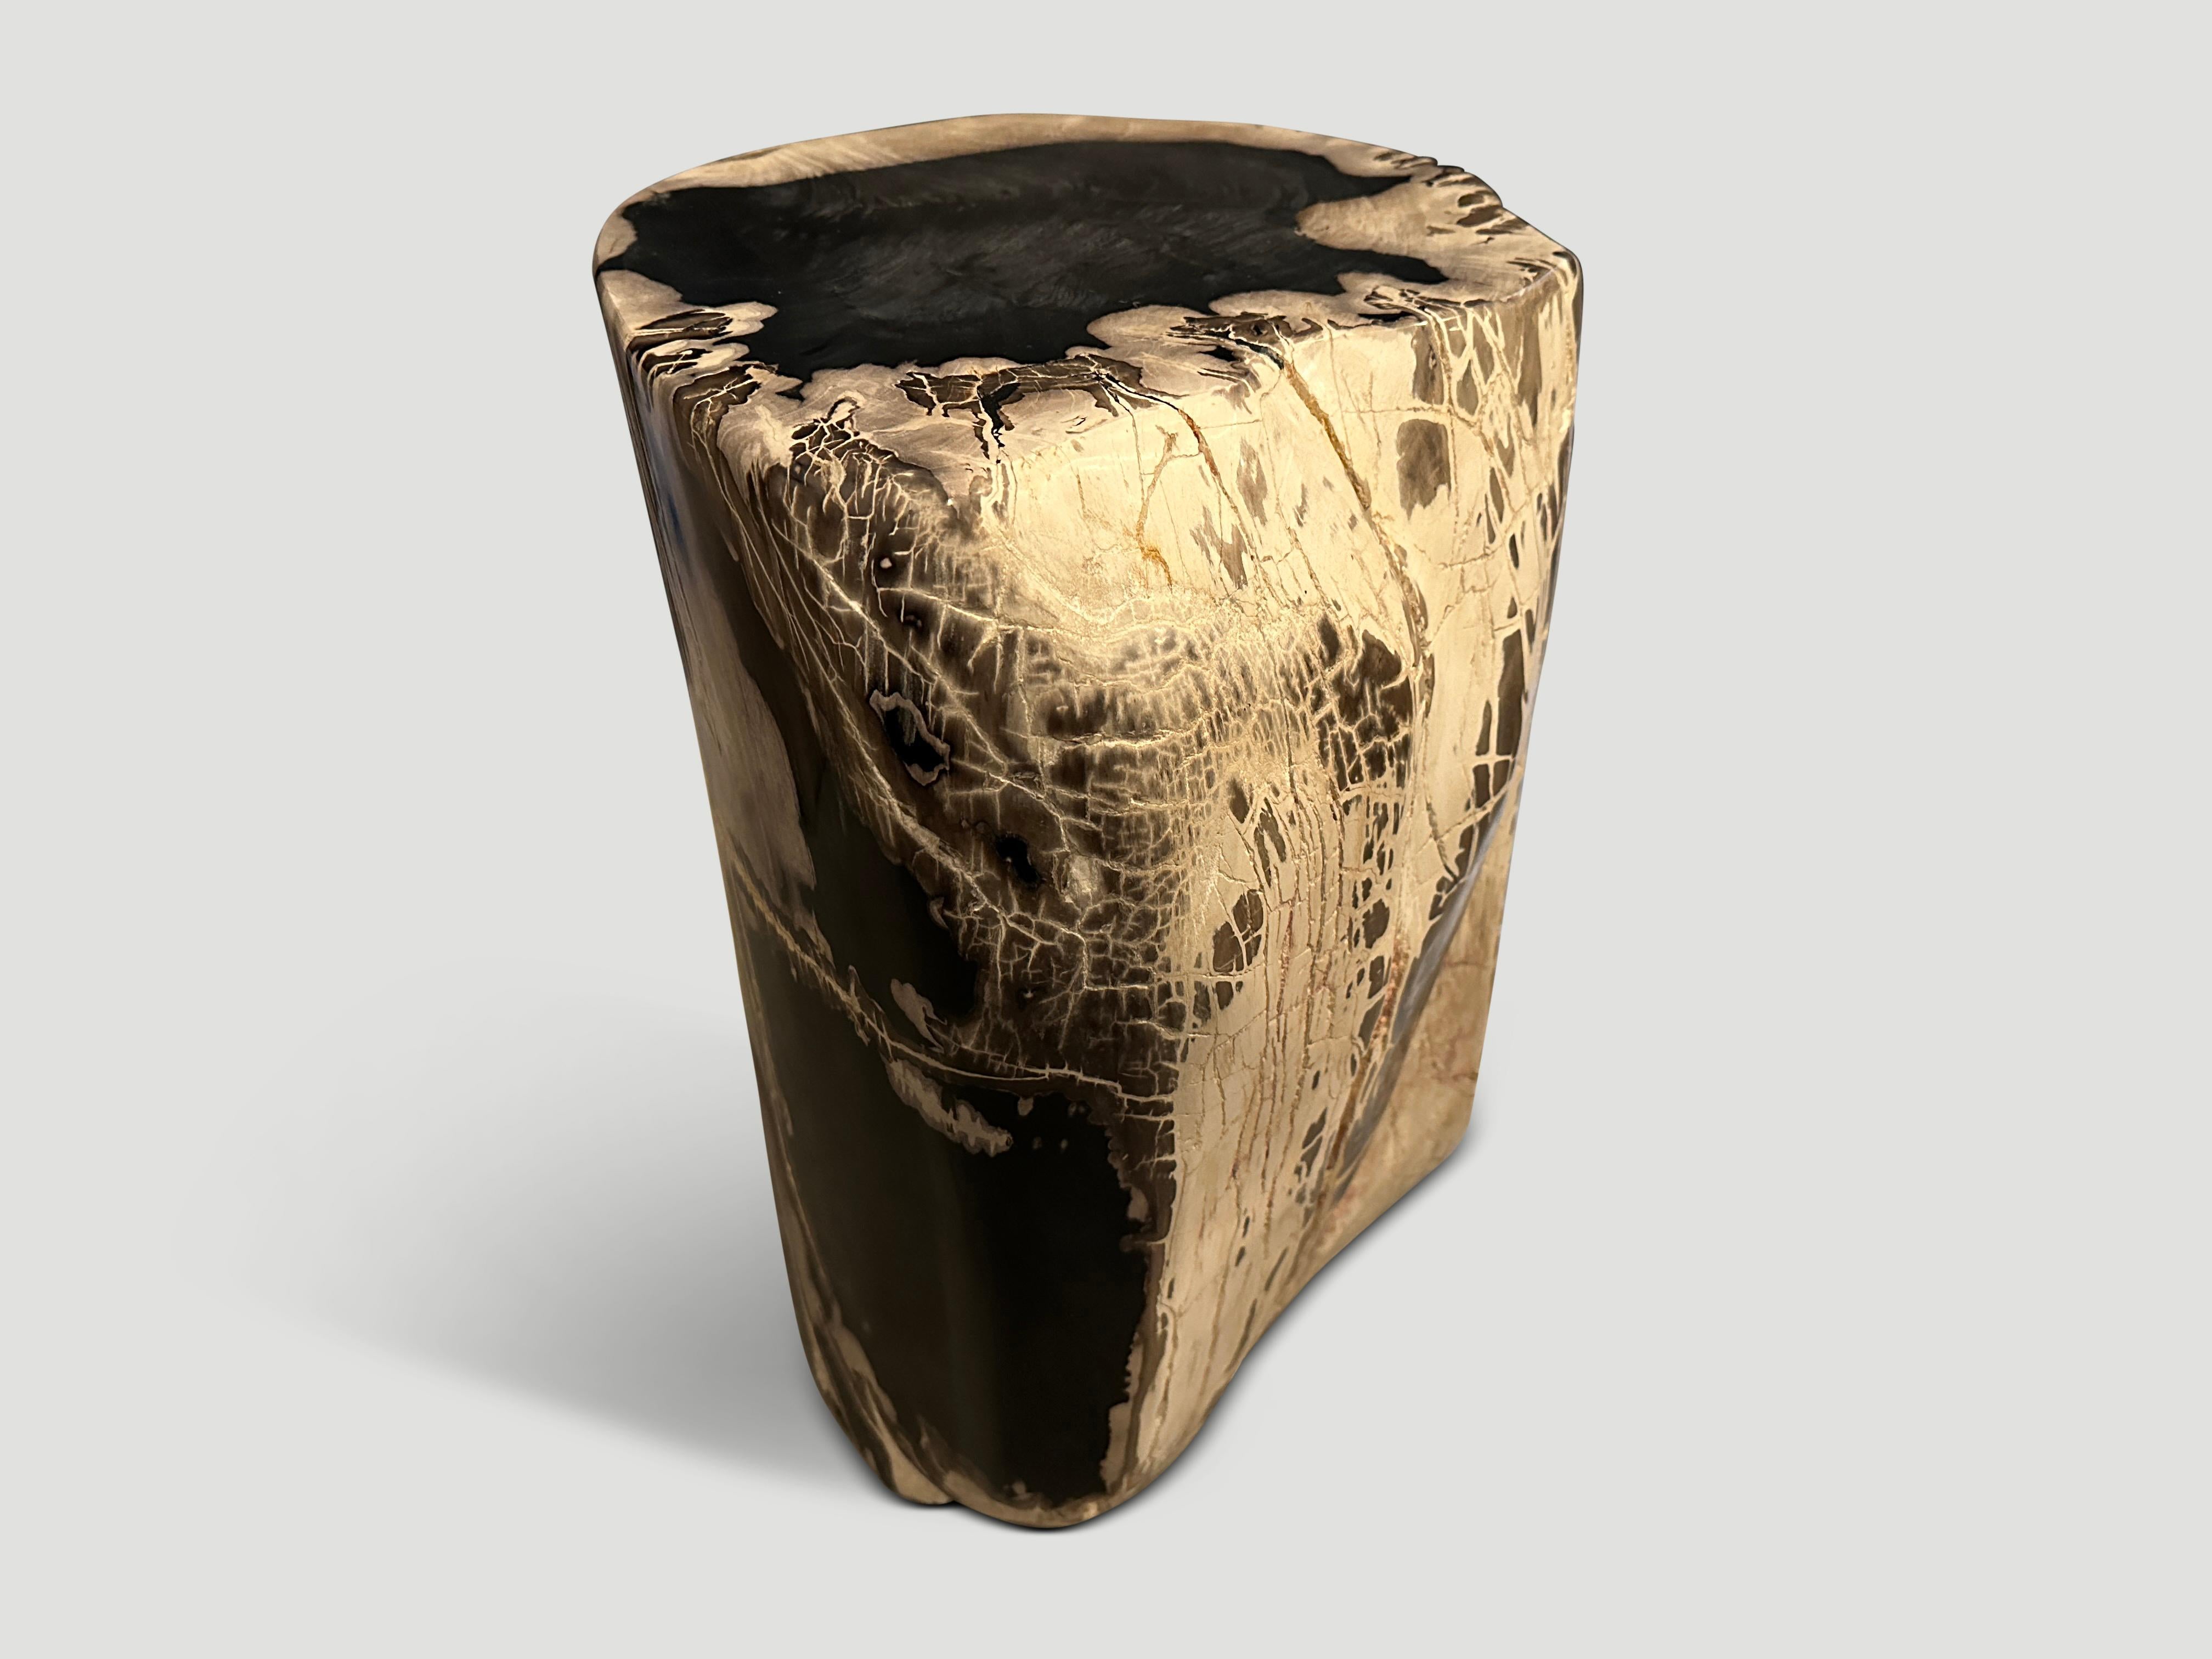 Organic Modern Andrianna Shamaris Exquisite High Quality Petrified Wood Side Table For Sale